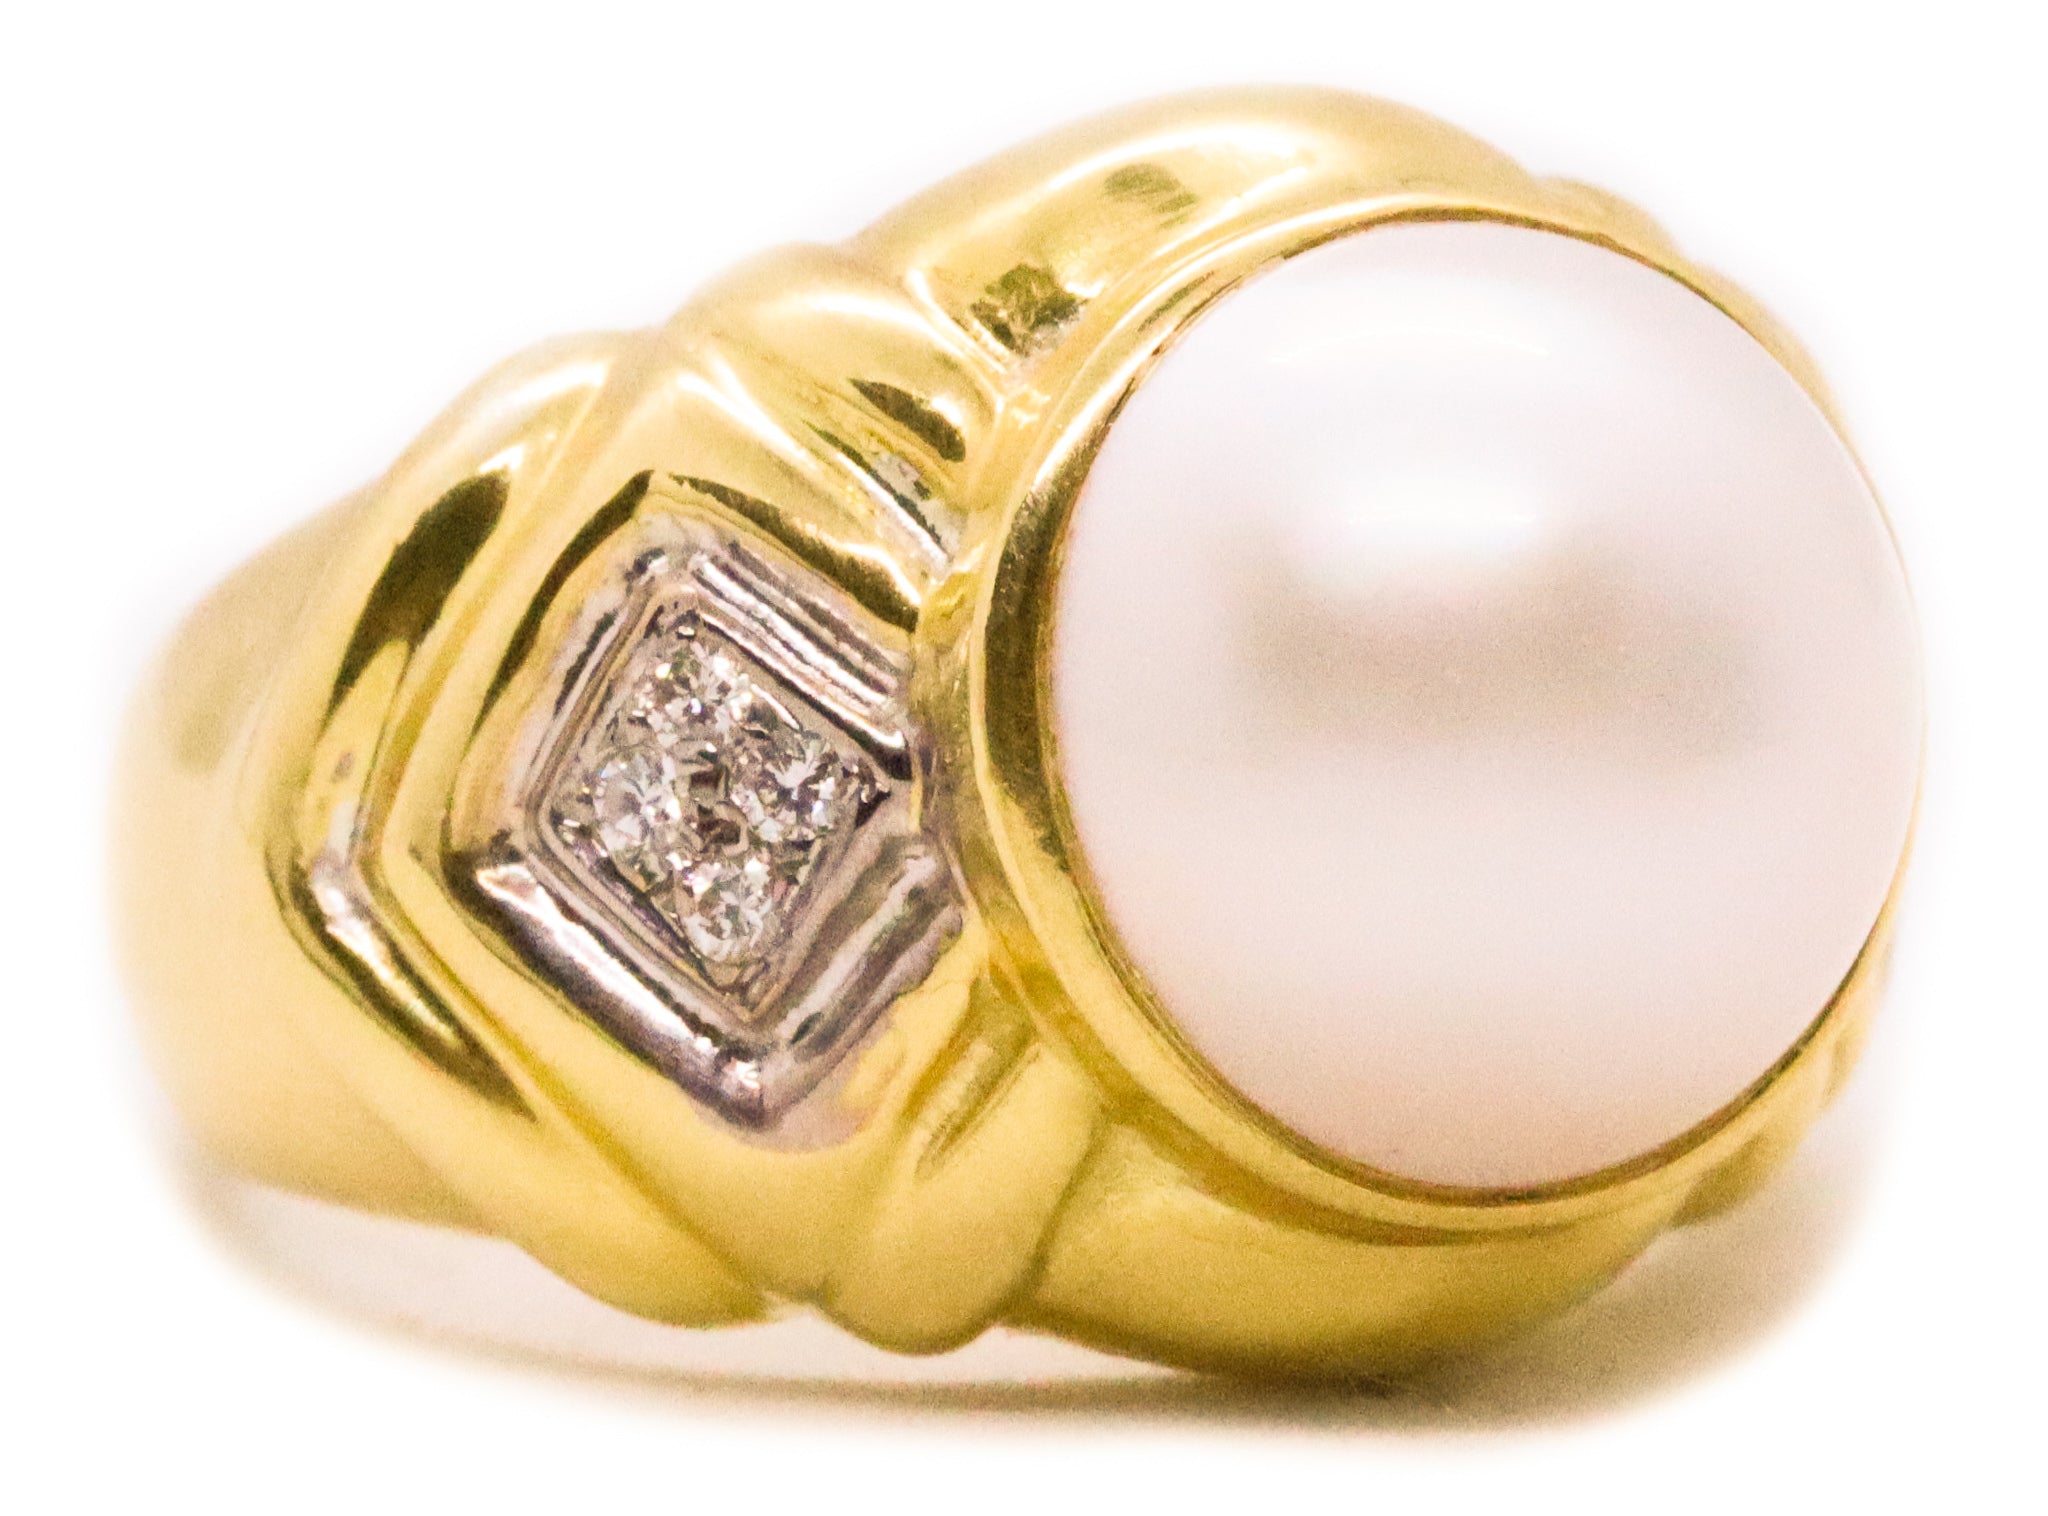 Italian Modern Cocktail Ring In 18Kt Yellow Gold With Diamonds And White Pearl